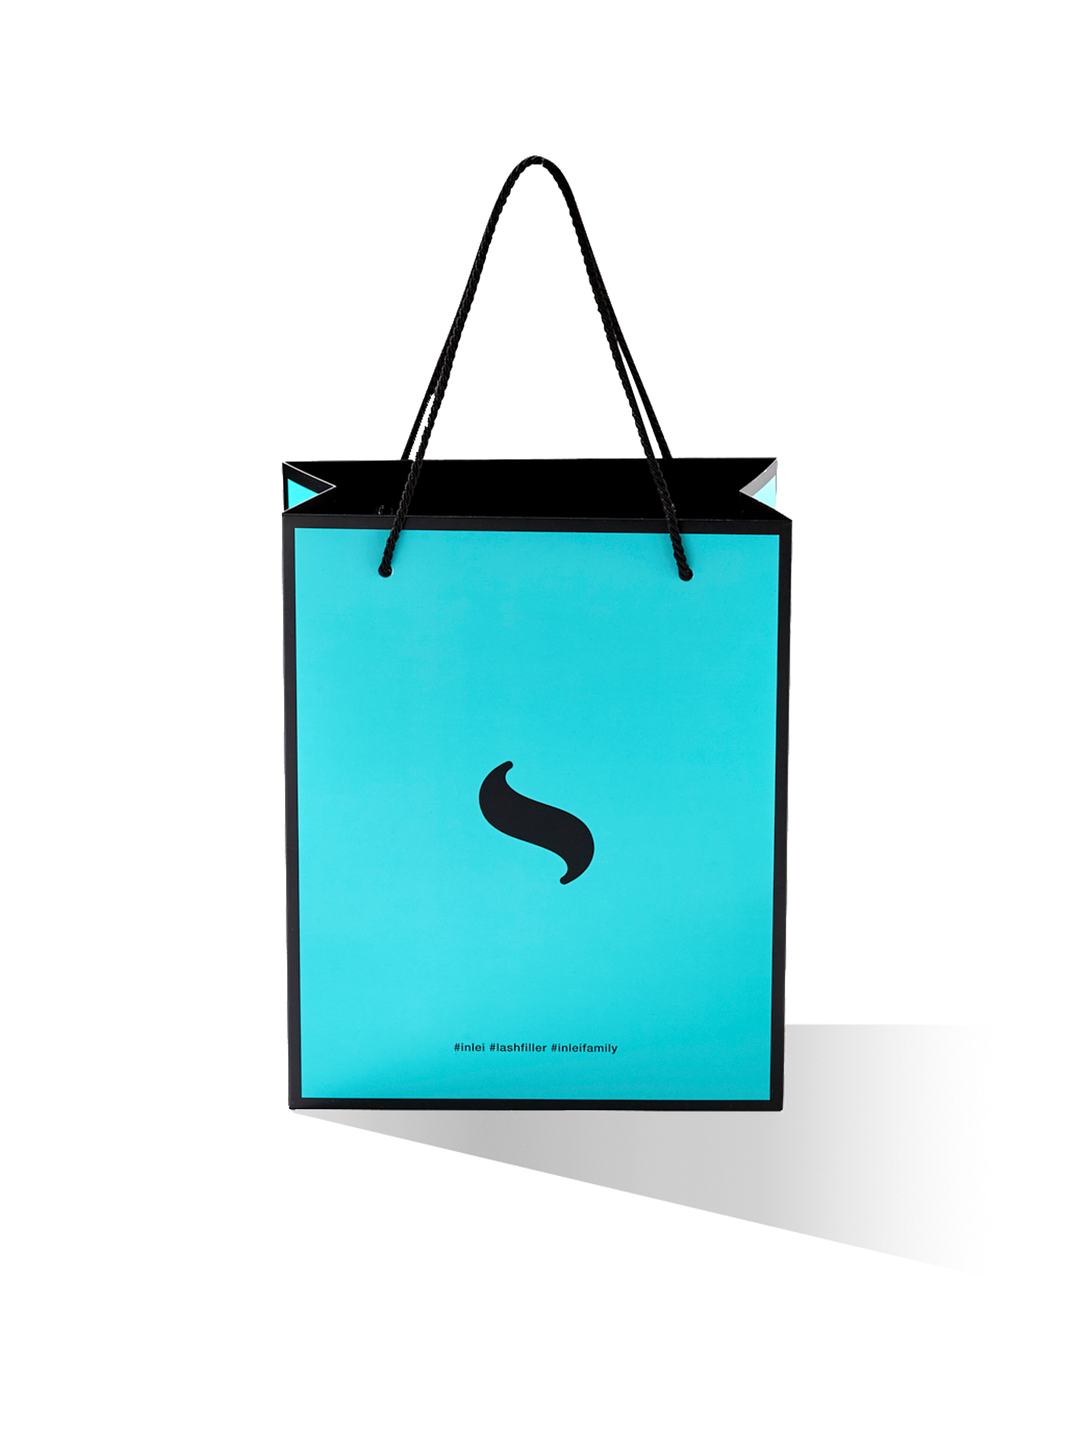 DELUXE HANDBAG | in paper with personalized brand graphics